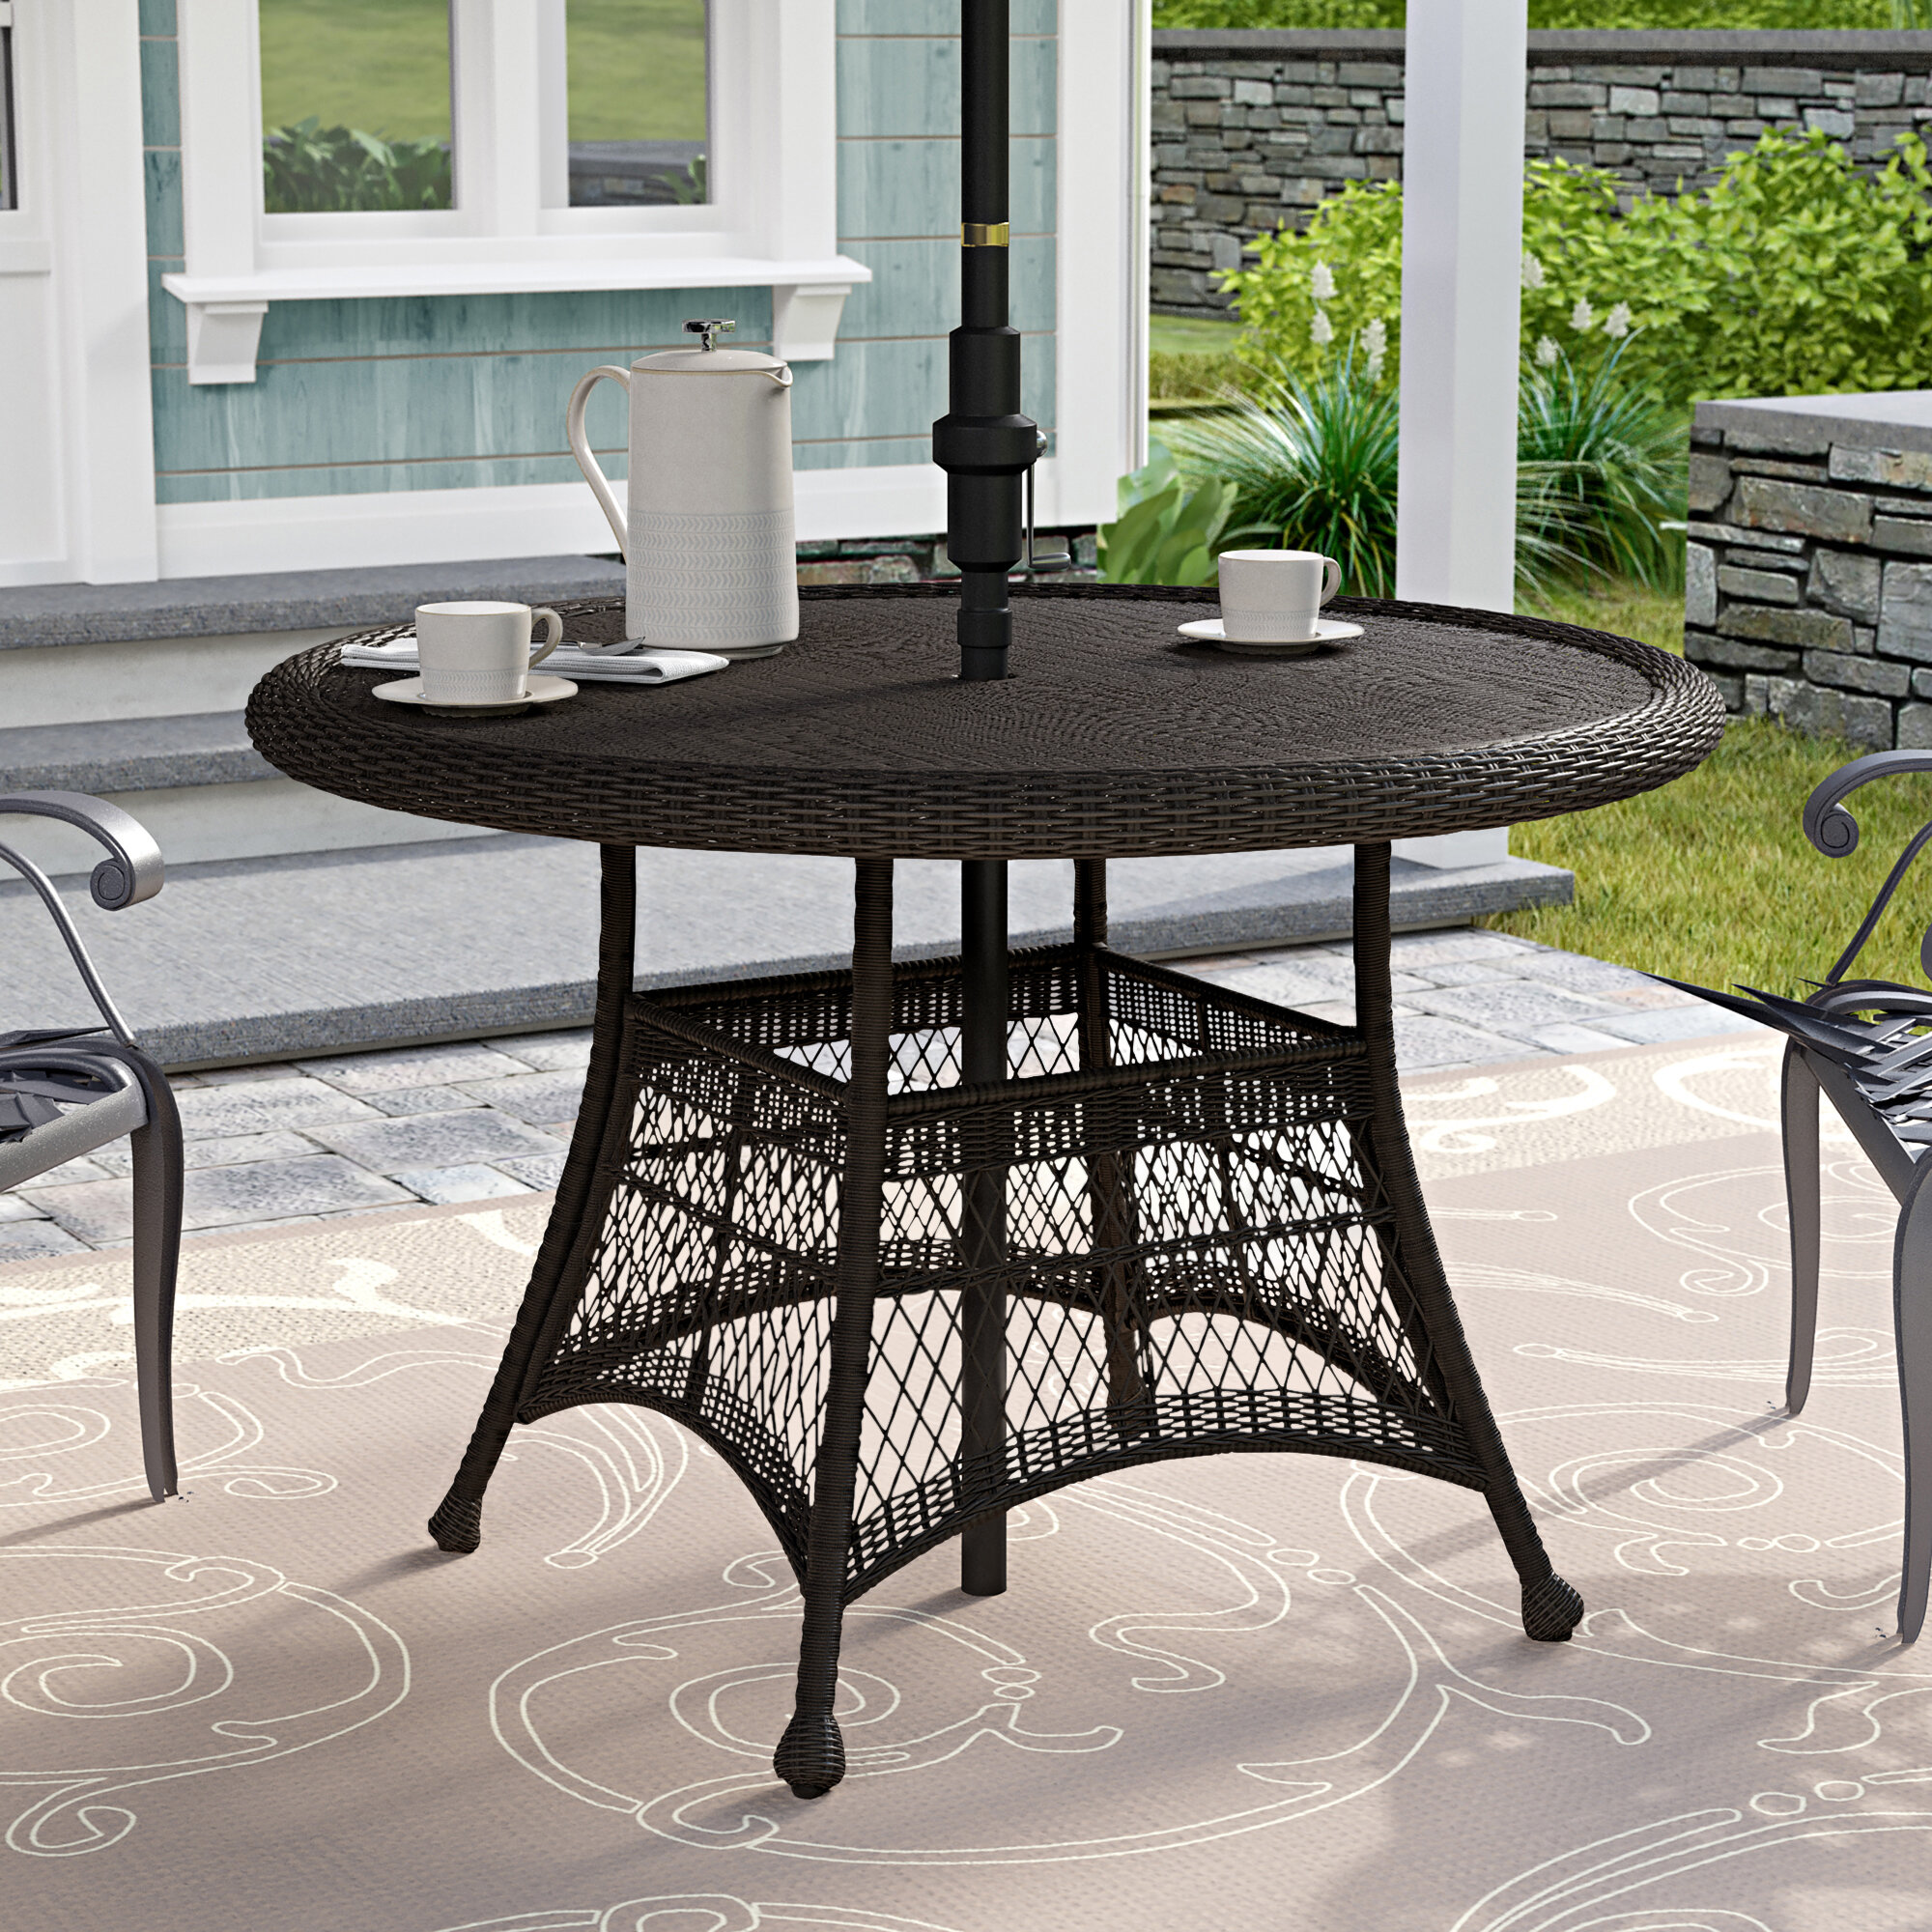 Details about   Patio Dining Table Square Outdoor Garden Furniture Table With 1.7" Umbrella Hole 